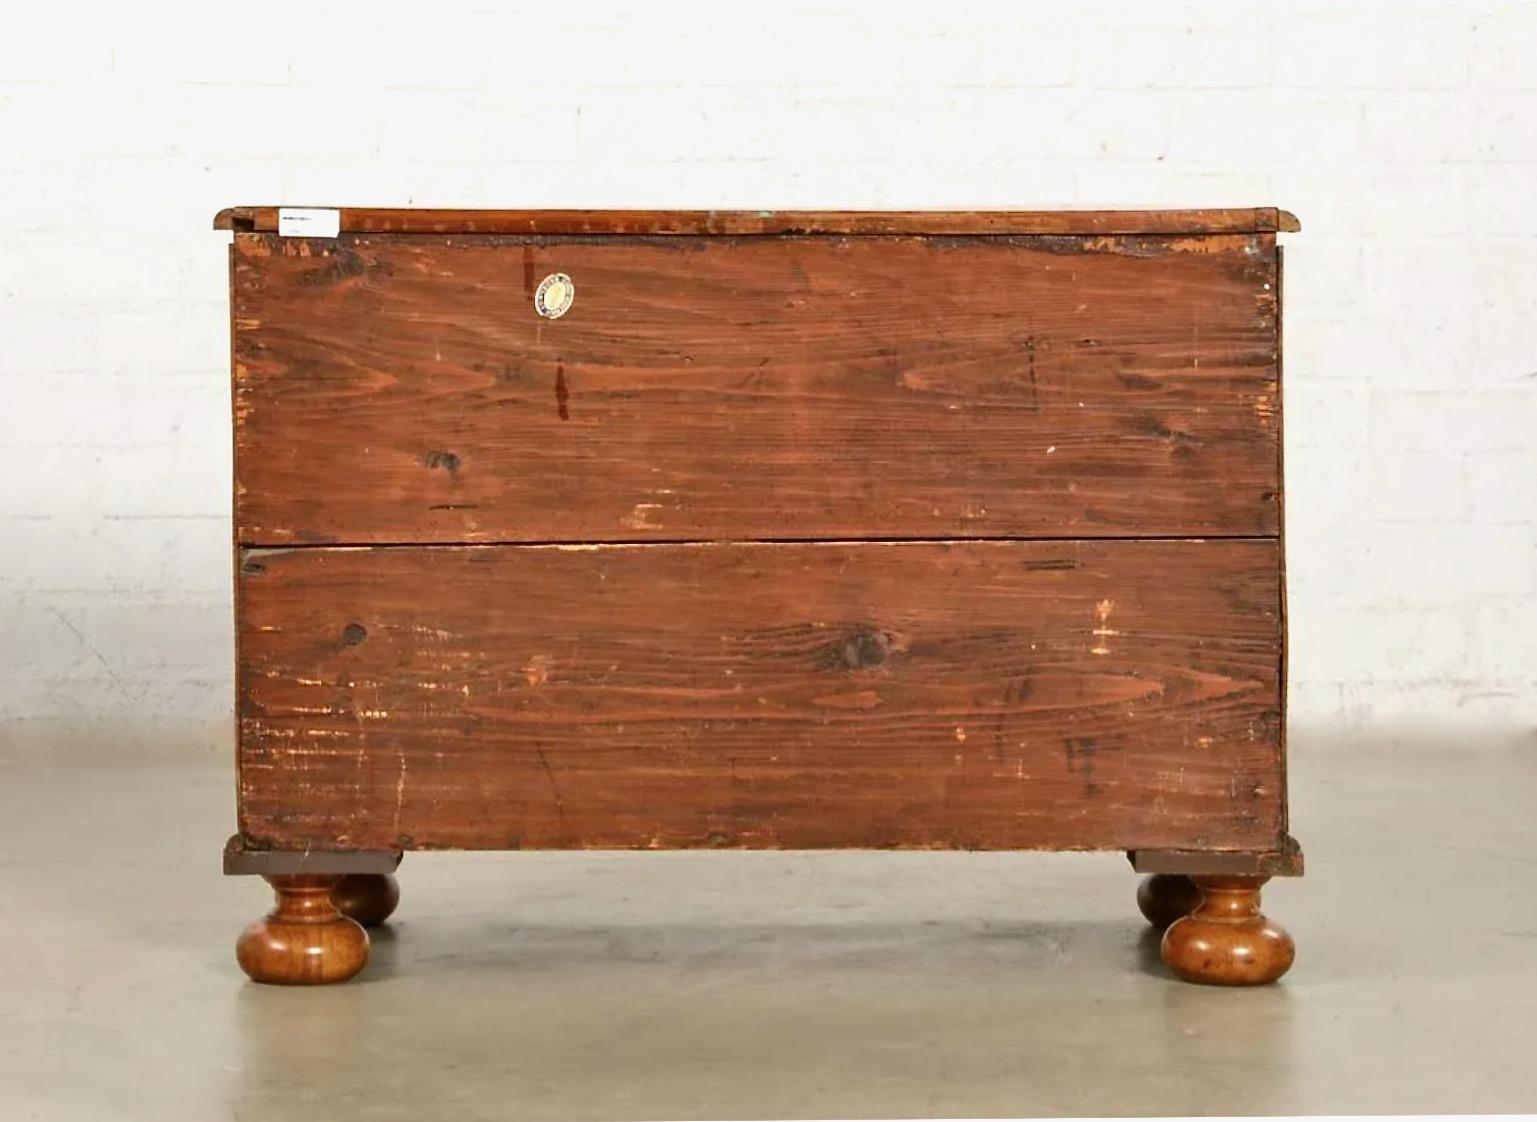 This is a good example of a German serpentine-front inlaid walnut and Circassian walnut chest of drawers that dates to the first half of the 18th century. The smaller proportions of this chest make it comparable to an english bachelors chest. The